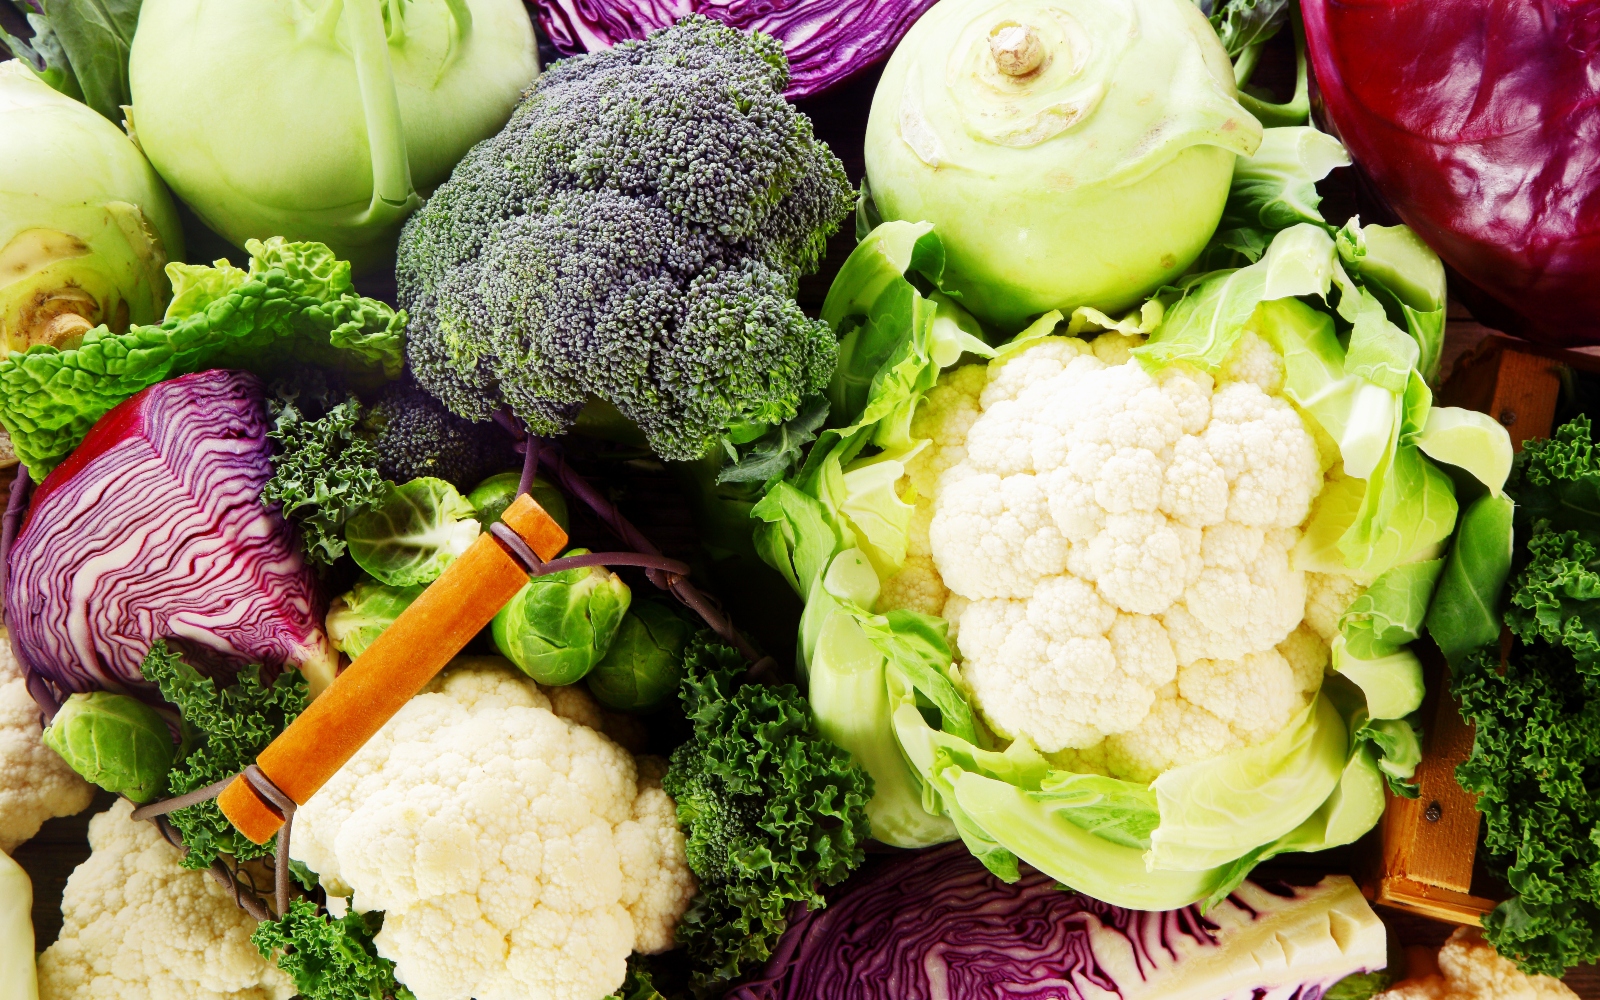 A pile of cruciferous vegetables like broccoli, cauliflower, and more.